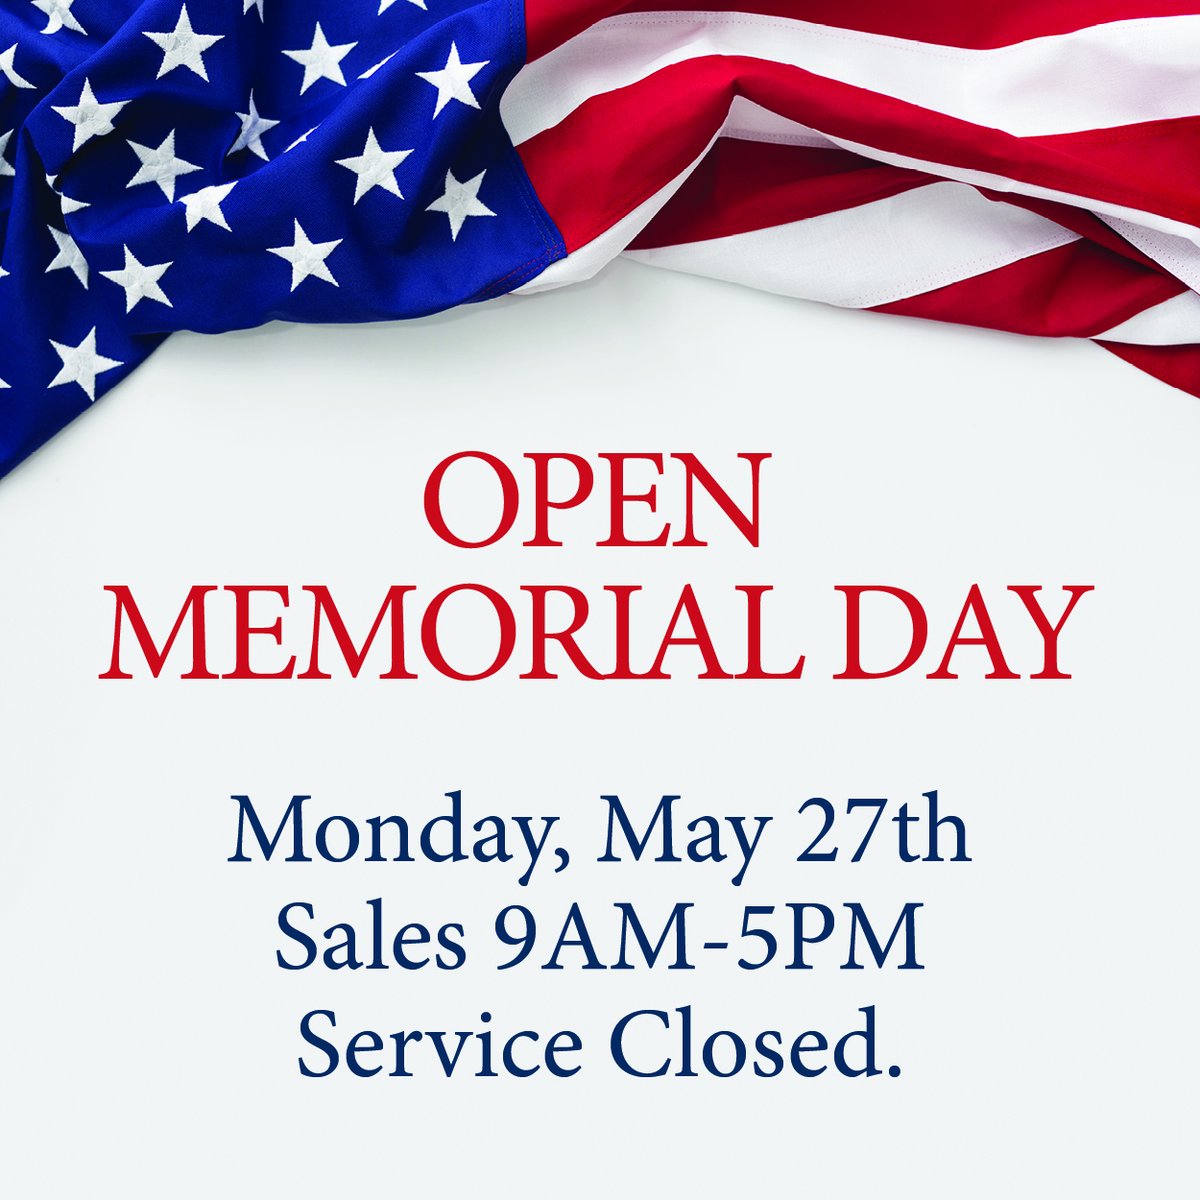 **5/27 special hours!** 🕙 
Swing by and discover exclusive offers as we salute those who served. 🚗🇺🇸 
.
.
.
#mercedesbenzofparamus #mercedesbenz #mbusa #BrandLoyalty #MercedesBenz #luxurycars #carshopping #luxurycars #luxurybrand #paramus #paramusnj